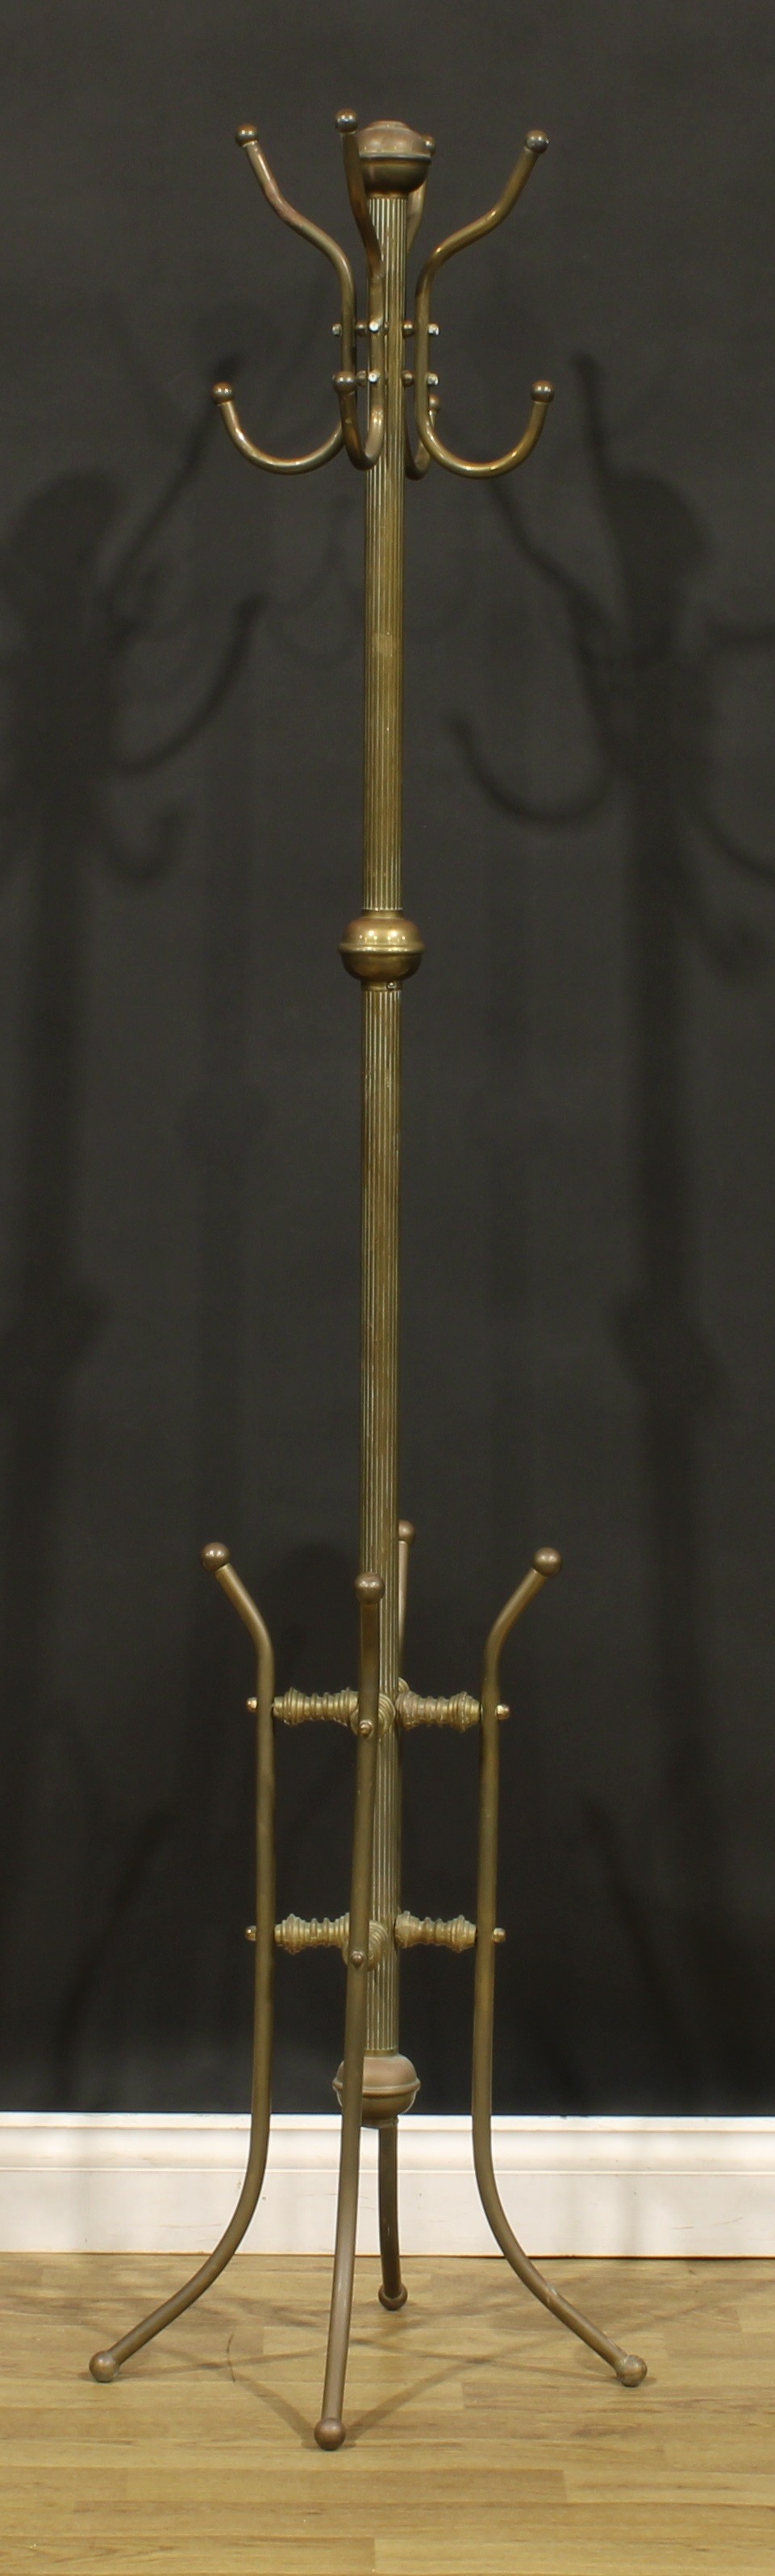 An early 20th century brass coat and hat stand, possibly American, in the Aesthetic Movement - Image 3 of 3